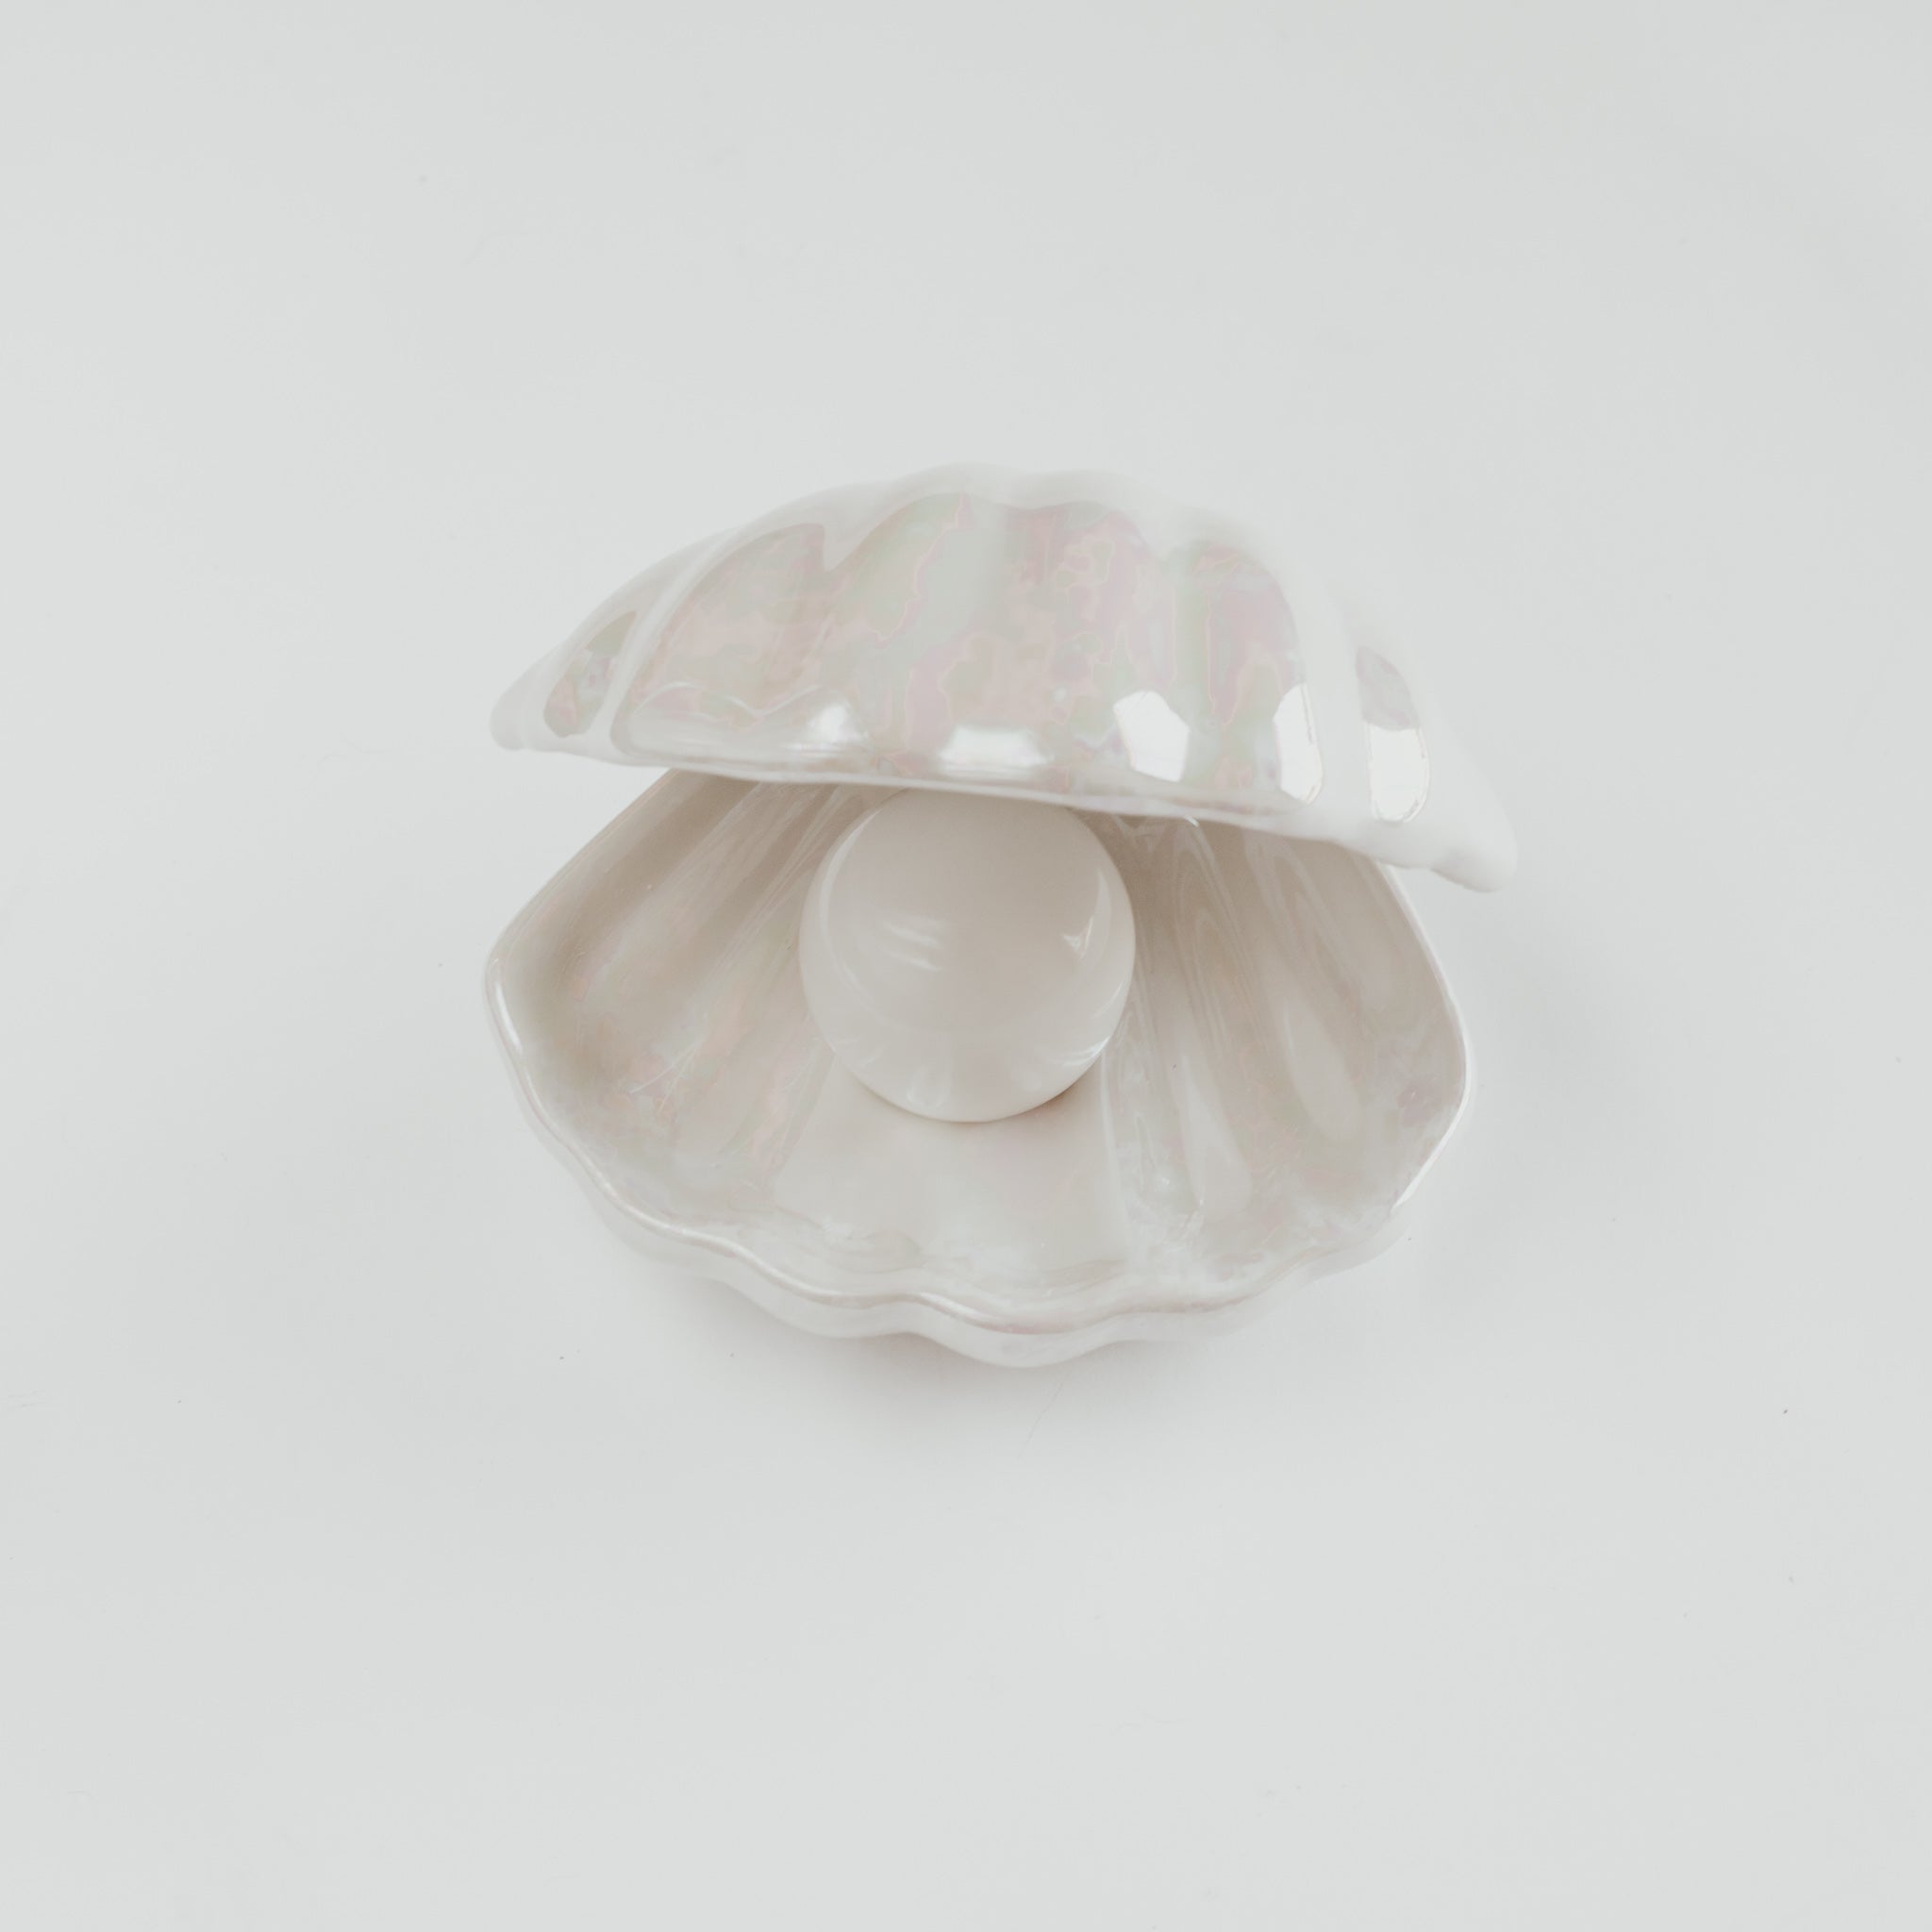 A white pearlescent ceramic shell tray with a pearl lamp inside against a white background